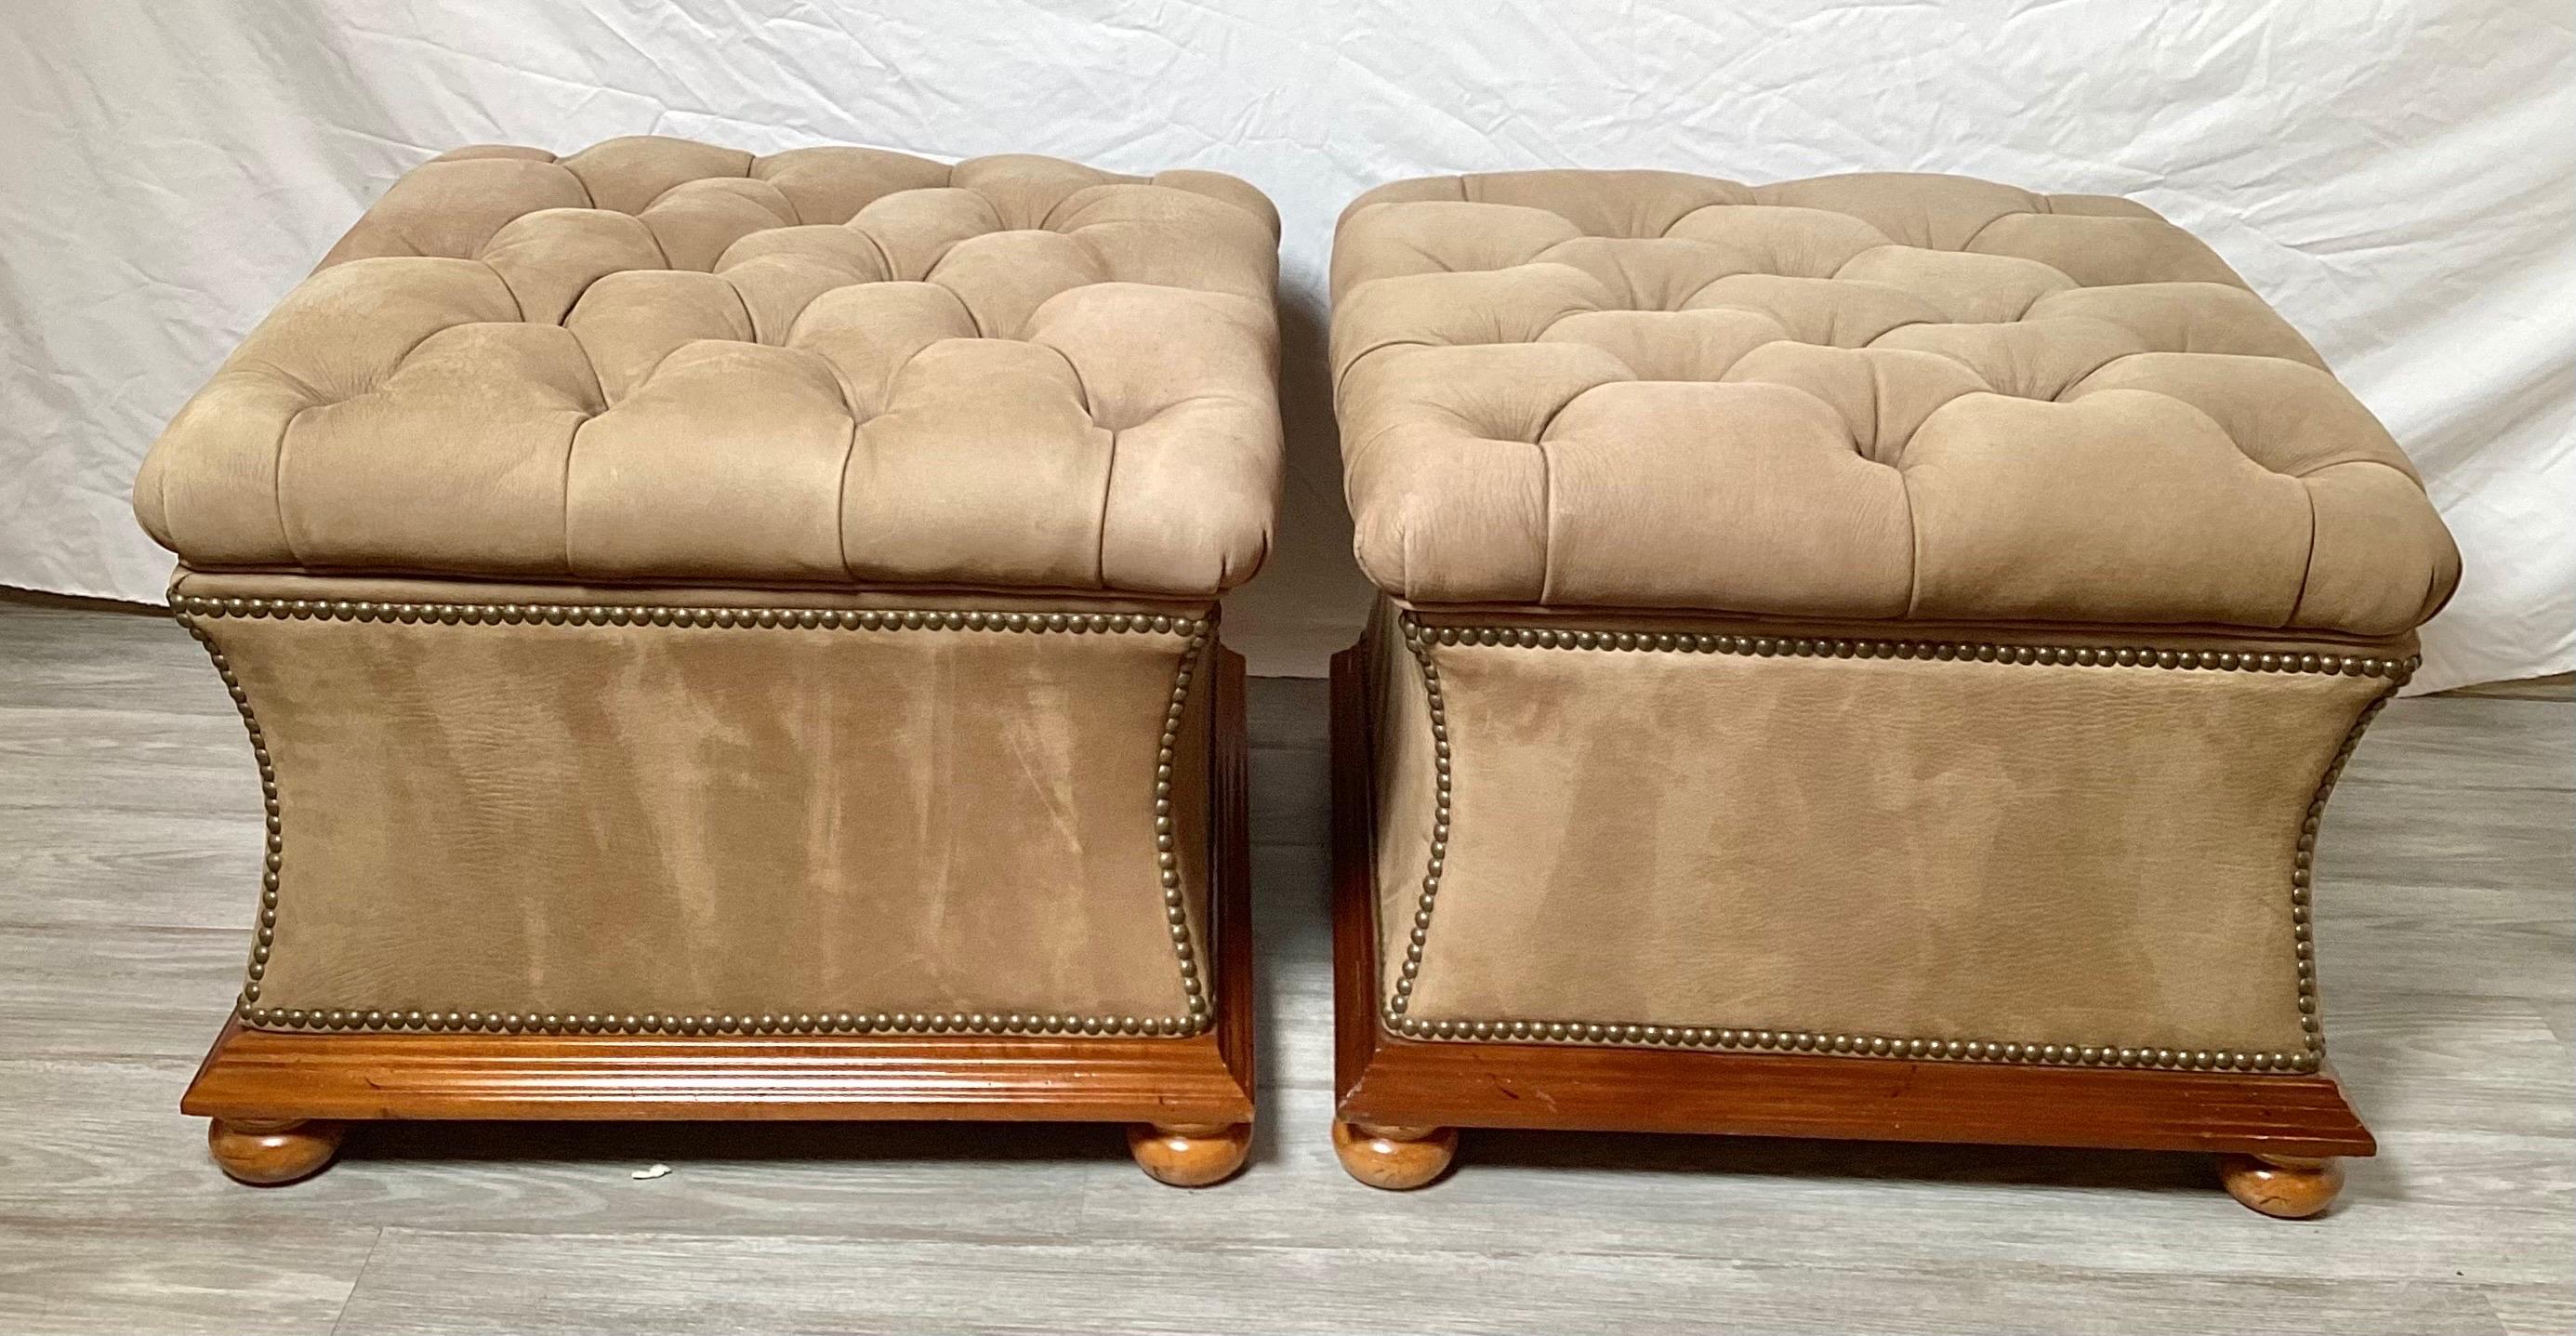 A chic pair of square tufted storage ottomans. The matt finished leather with antiqued brass nail-head trim. The lids remove to reveal storage.